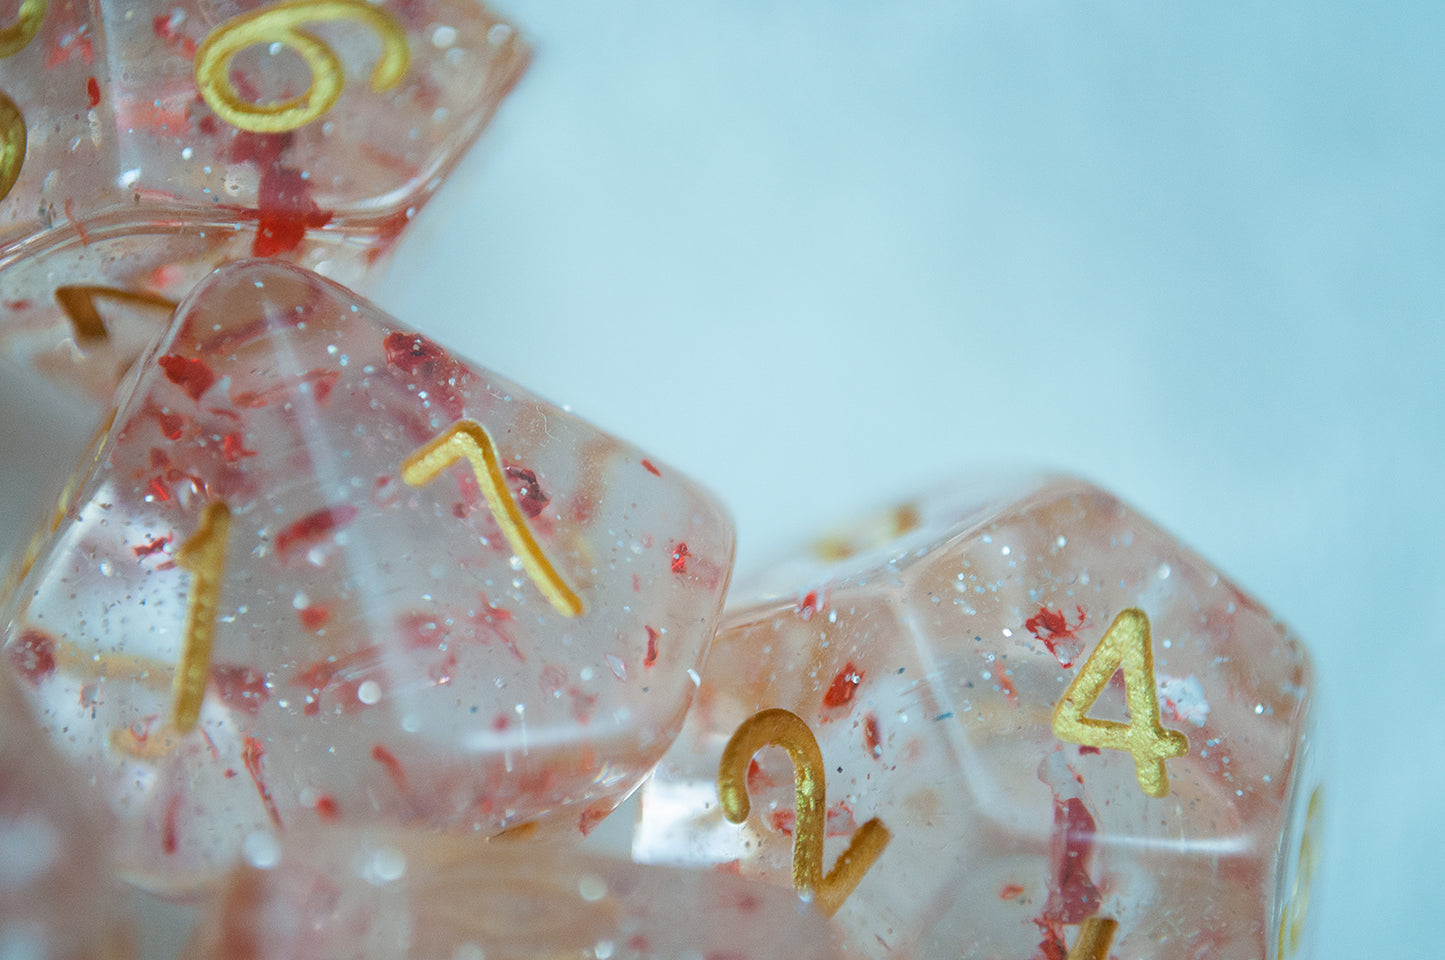 A close up of the Metallic Ruby 7 piece dice set from Tabletop Loot with red metallic flakes suspended in clear resin with glitter and gold numbering.